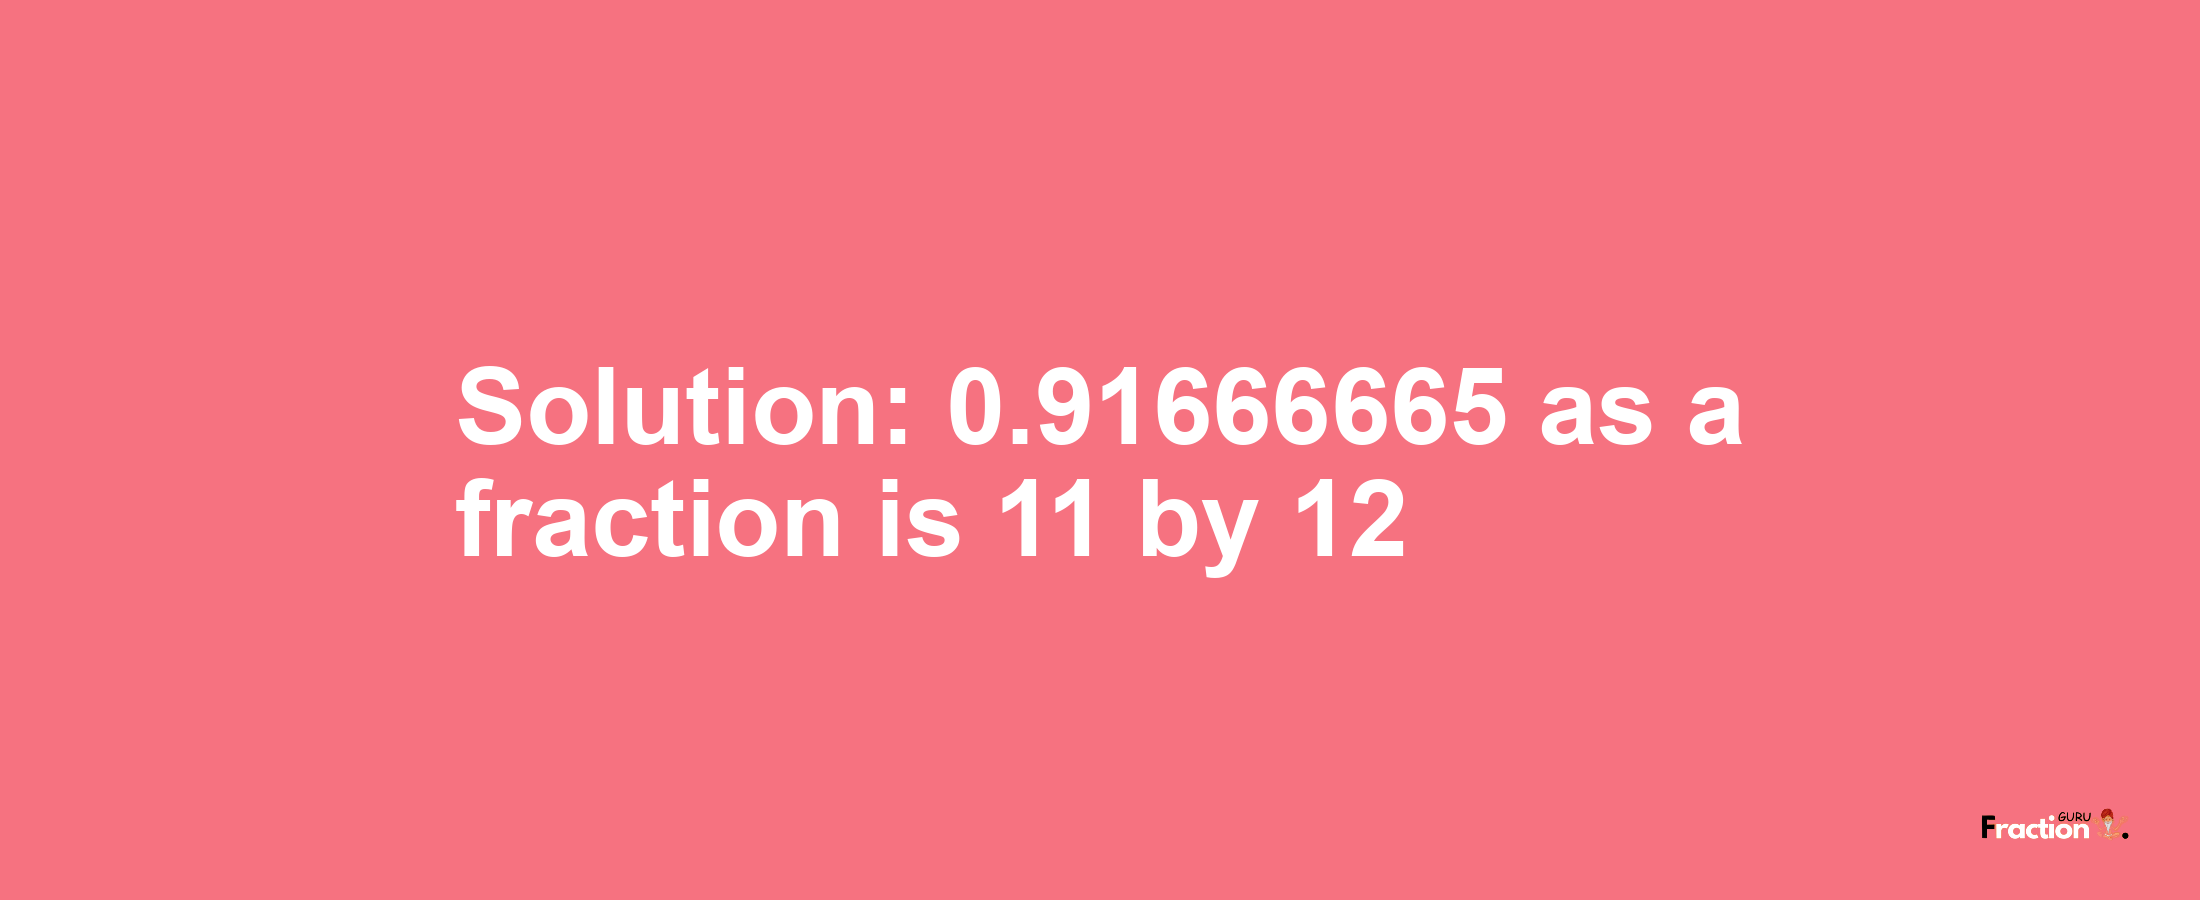 Solution:0.91666665 as a fraction is 11/12